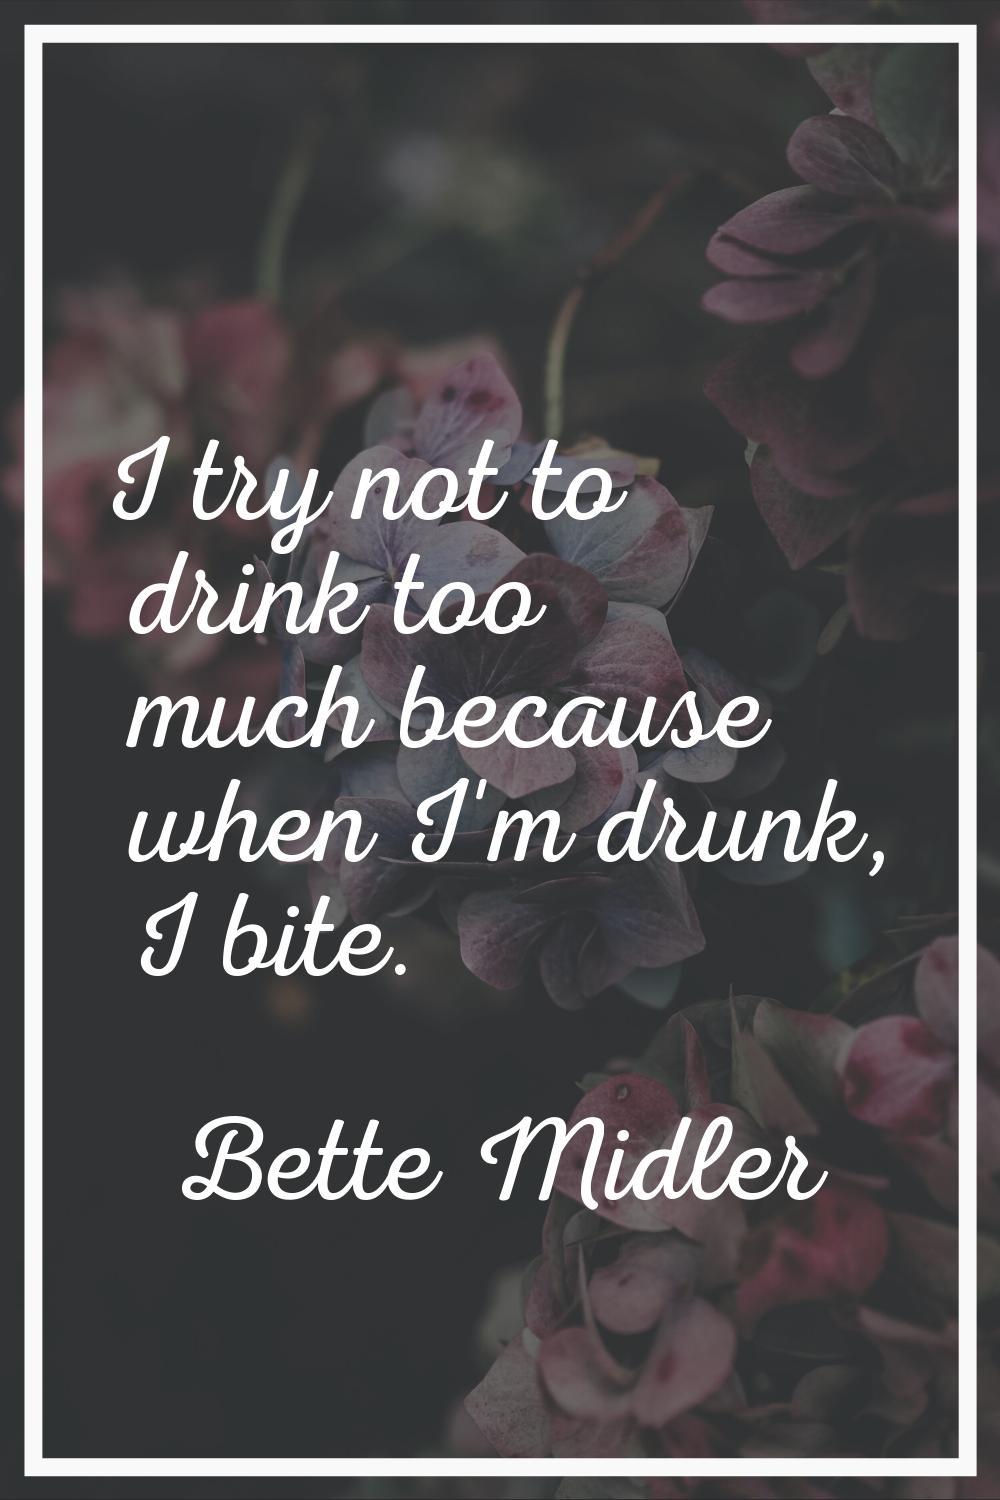 I try not to drink too much because when I'm drunk, I bite.